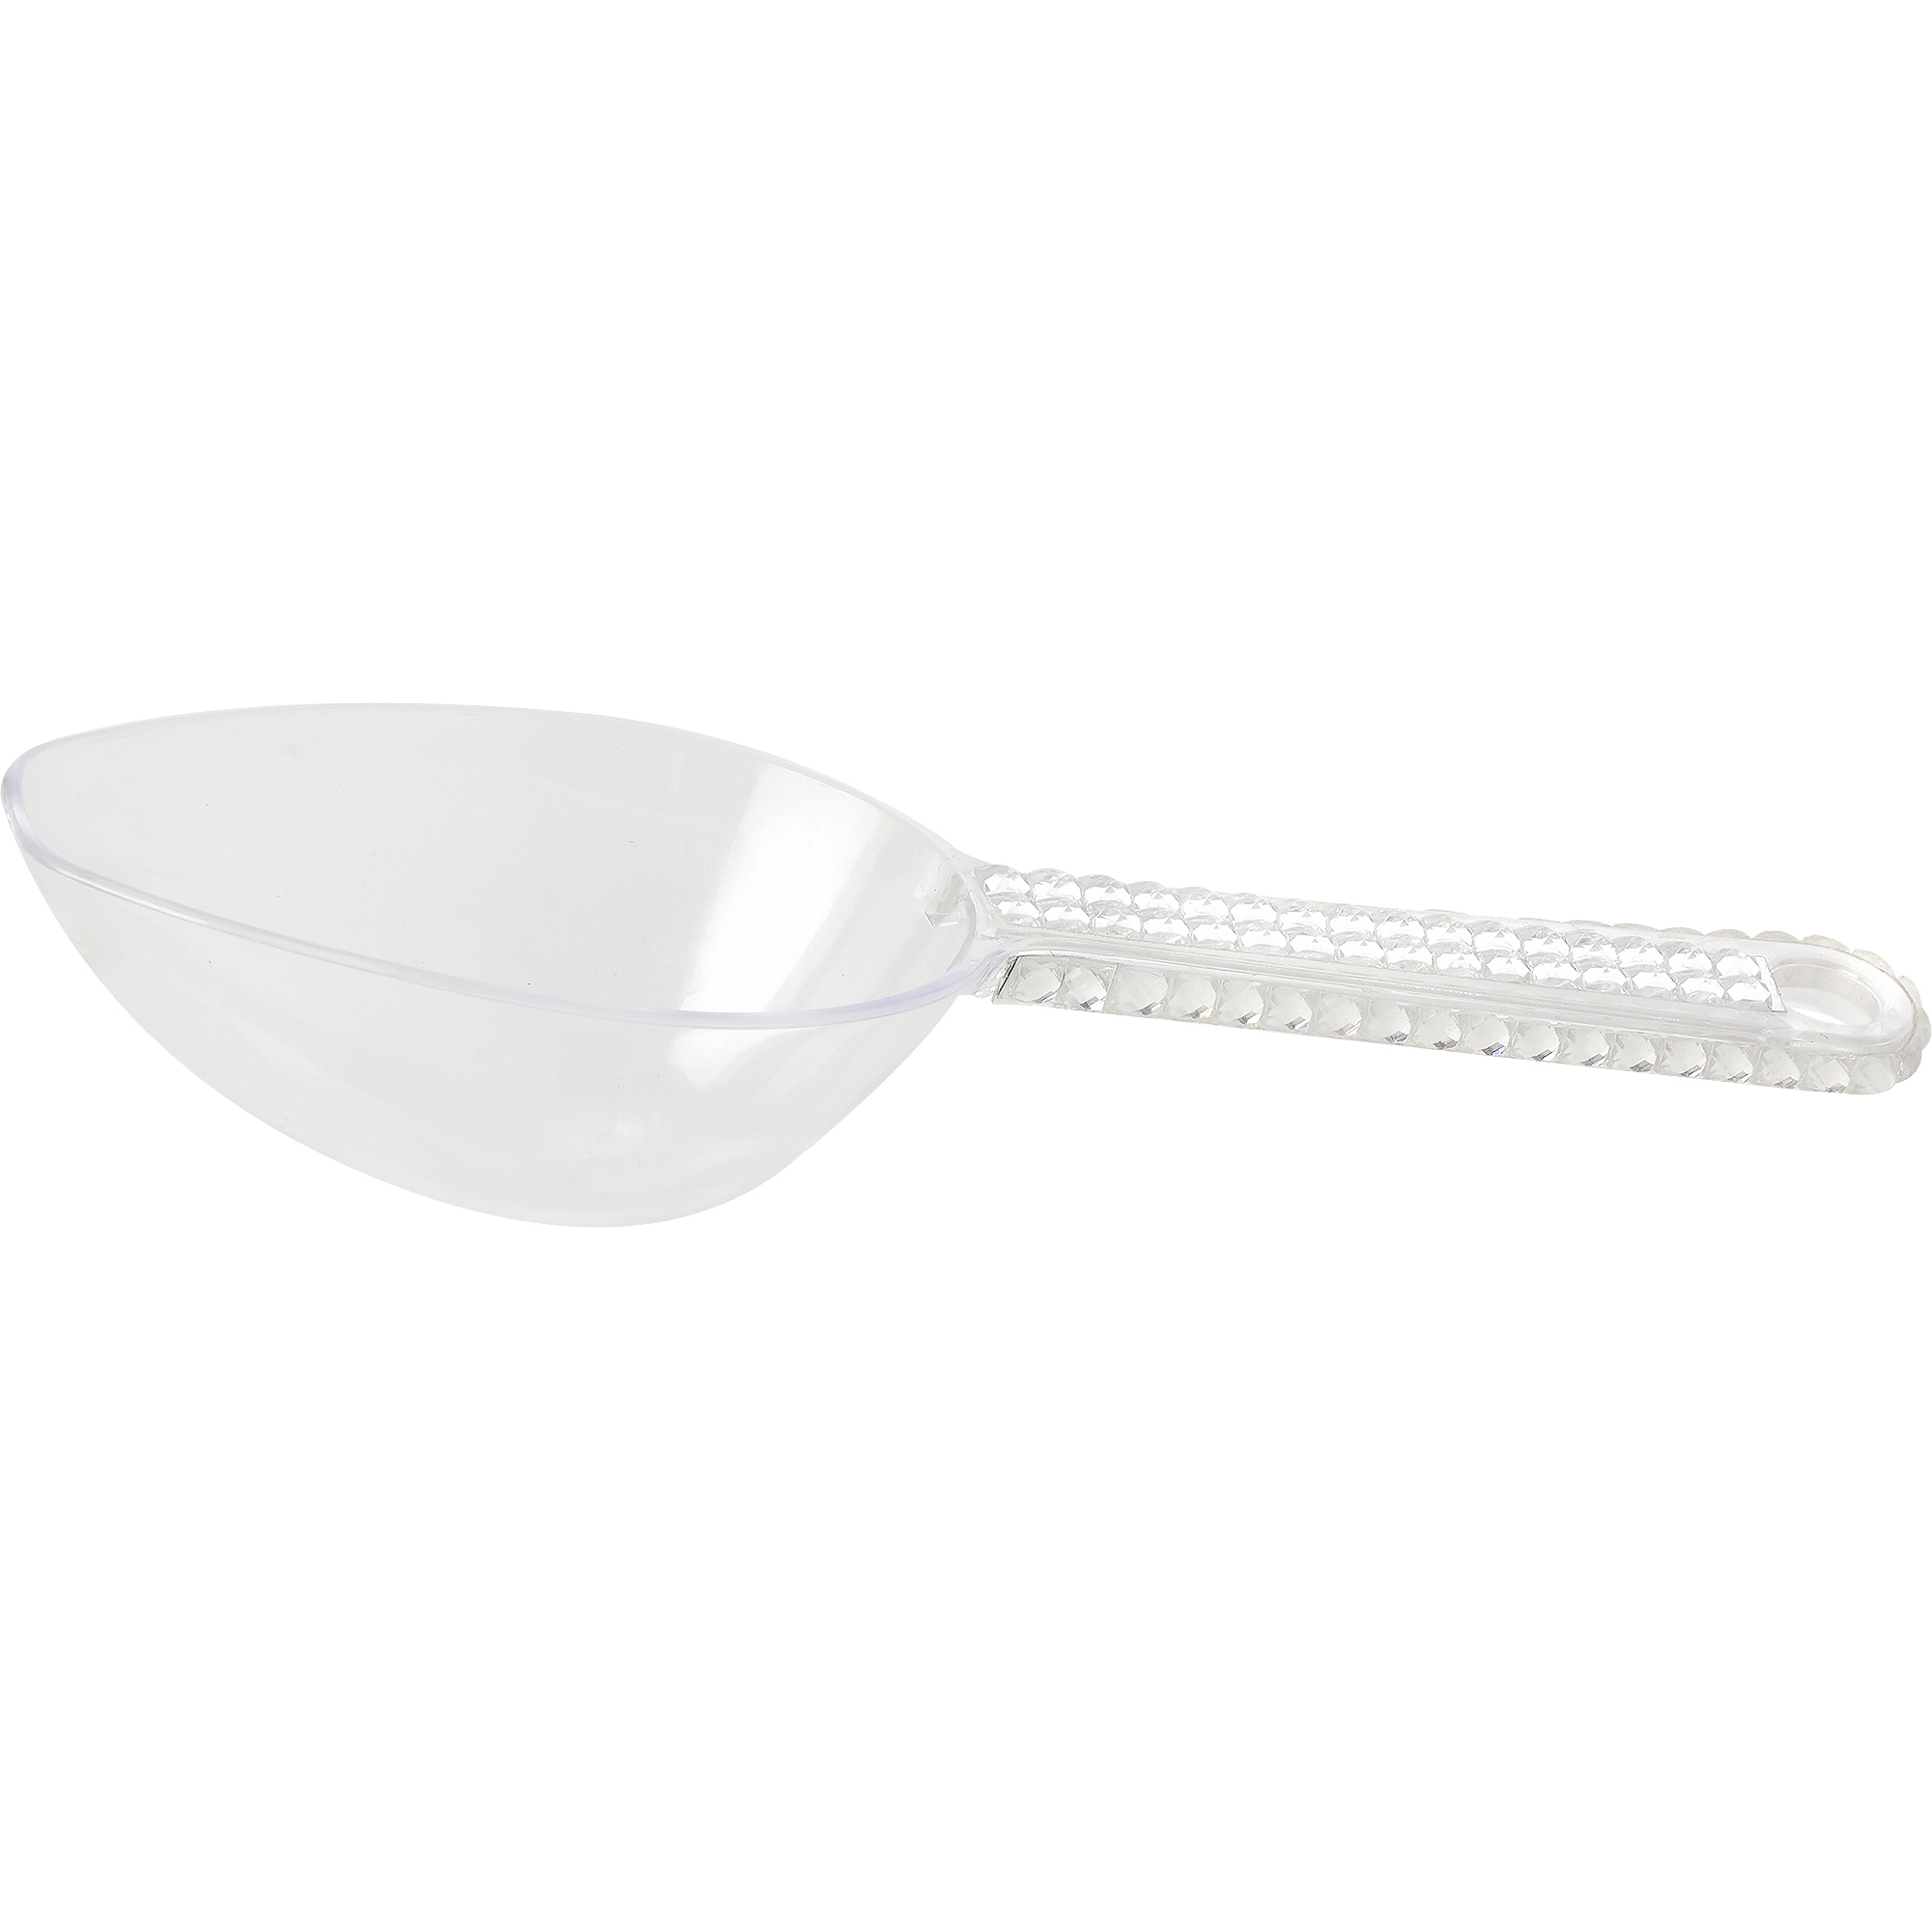 Plastic Candy Scoop 18pc/bag - Clear